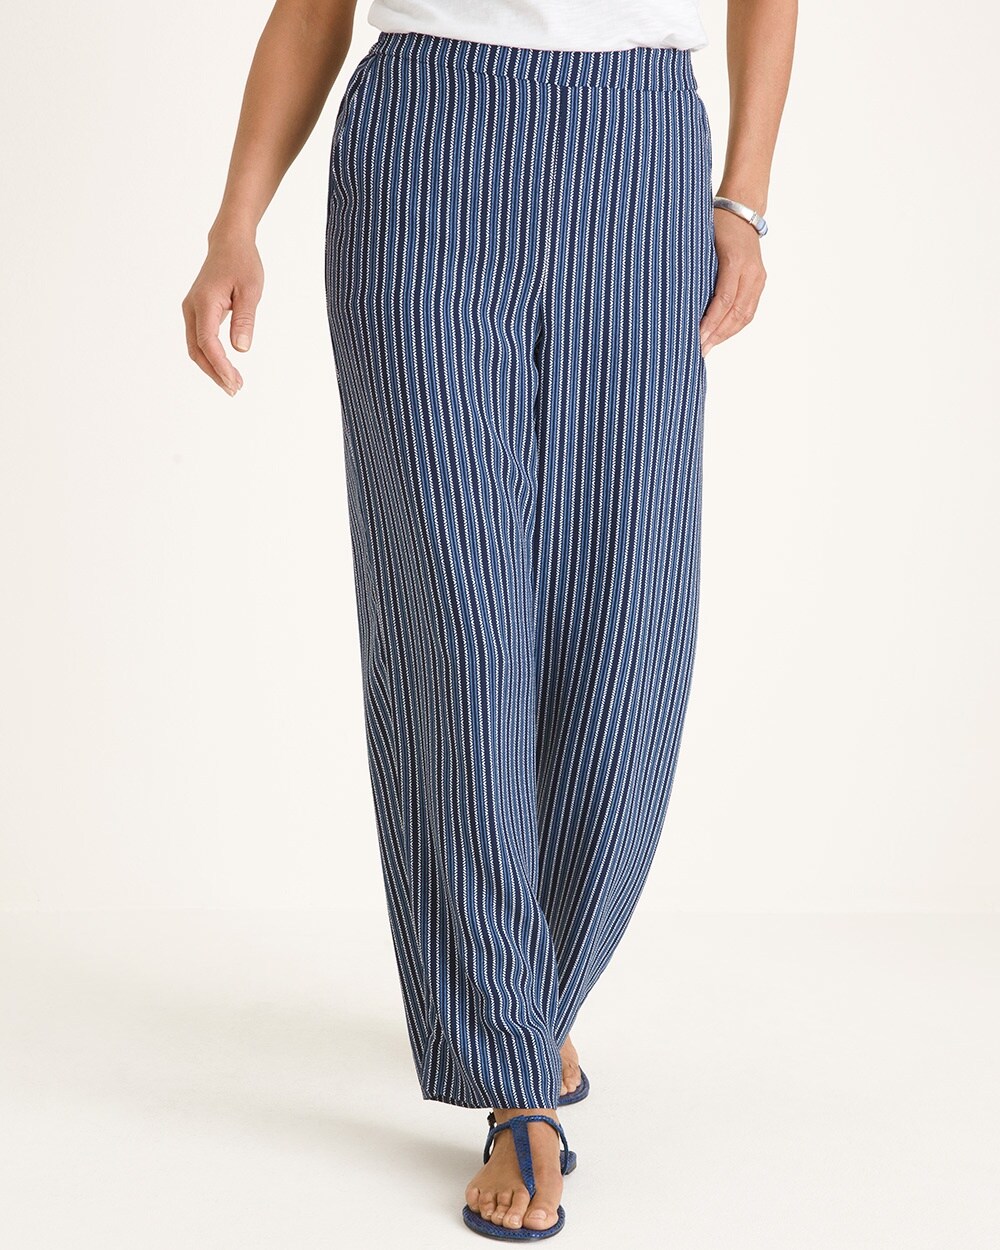 Indigo Striped Palazzo Pants video preview image, click to start video